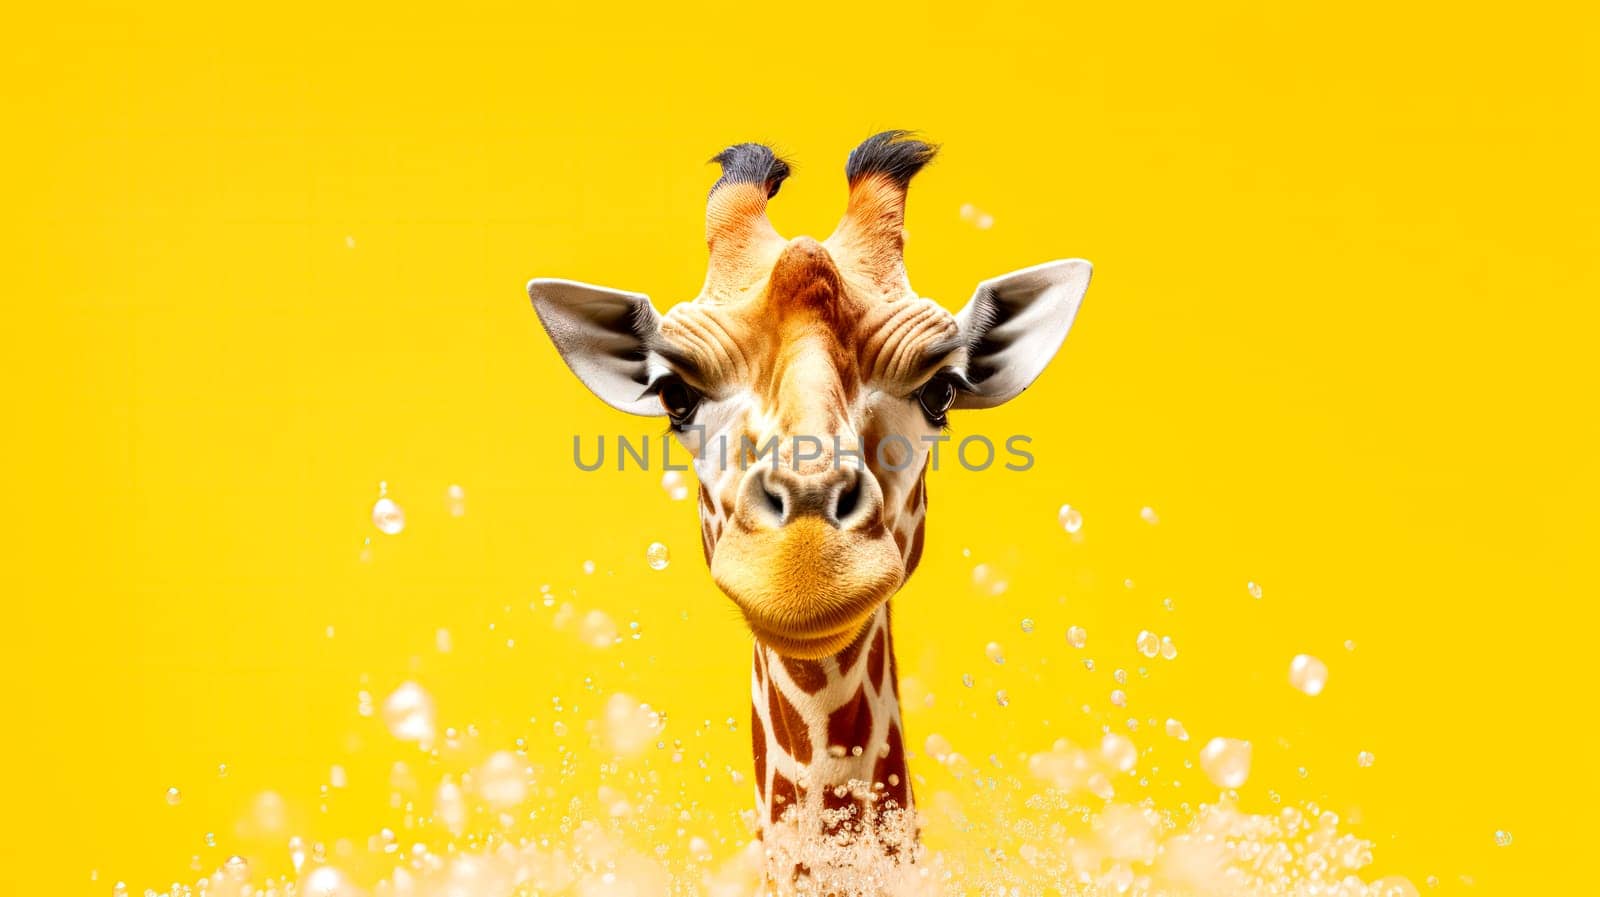 A playful giraffe enjoys a bubbly bath, surrounded by soap bubbles, against a cheerful yellow background, creating a whimsical and delightful scene.